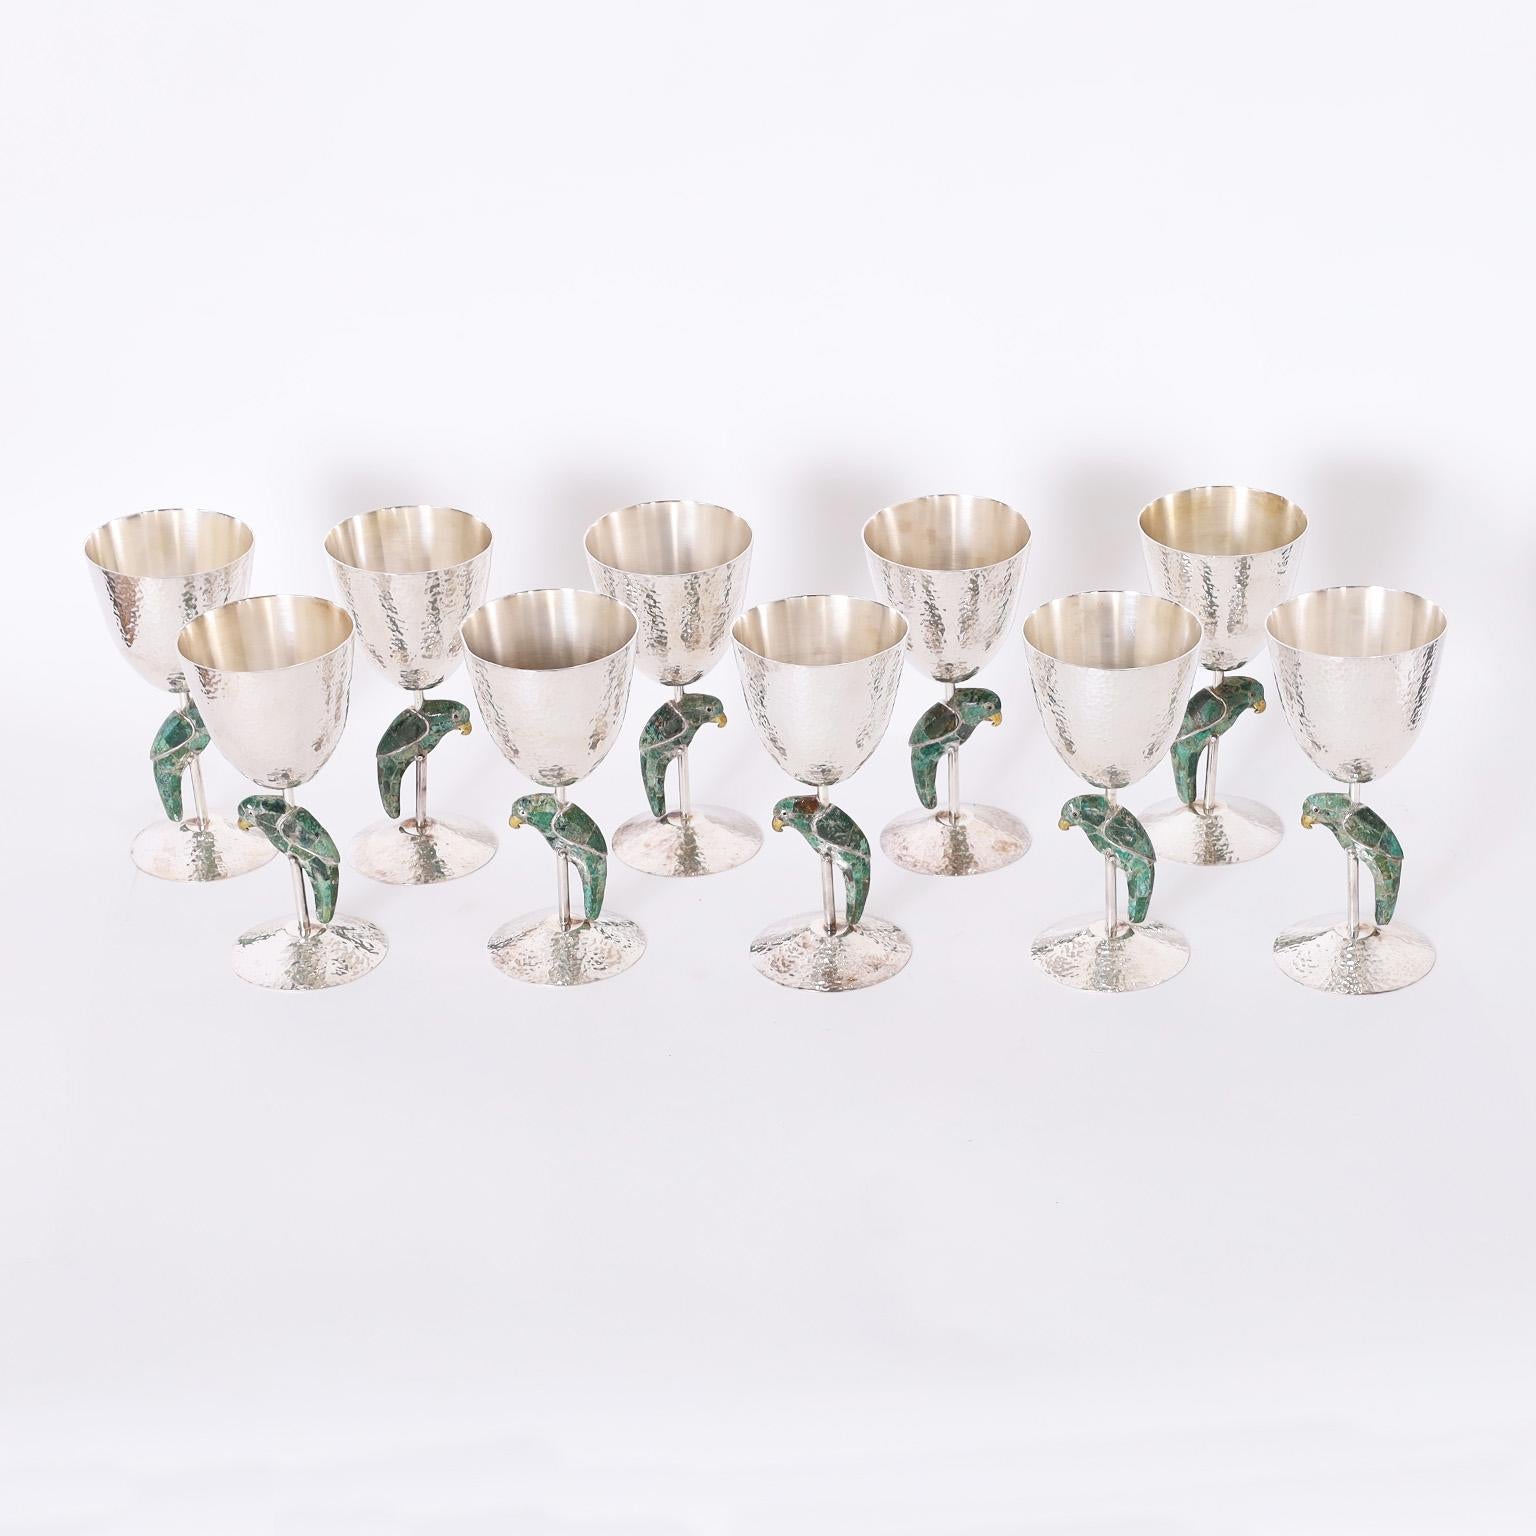 Rare and remarkable set of ten mid century goblets crafted in silver plate over hand hammered copper featuring stone clad parrots on the stems. Signed Los Castillo on the bottoms.